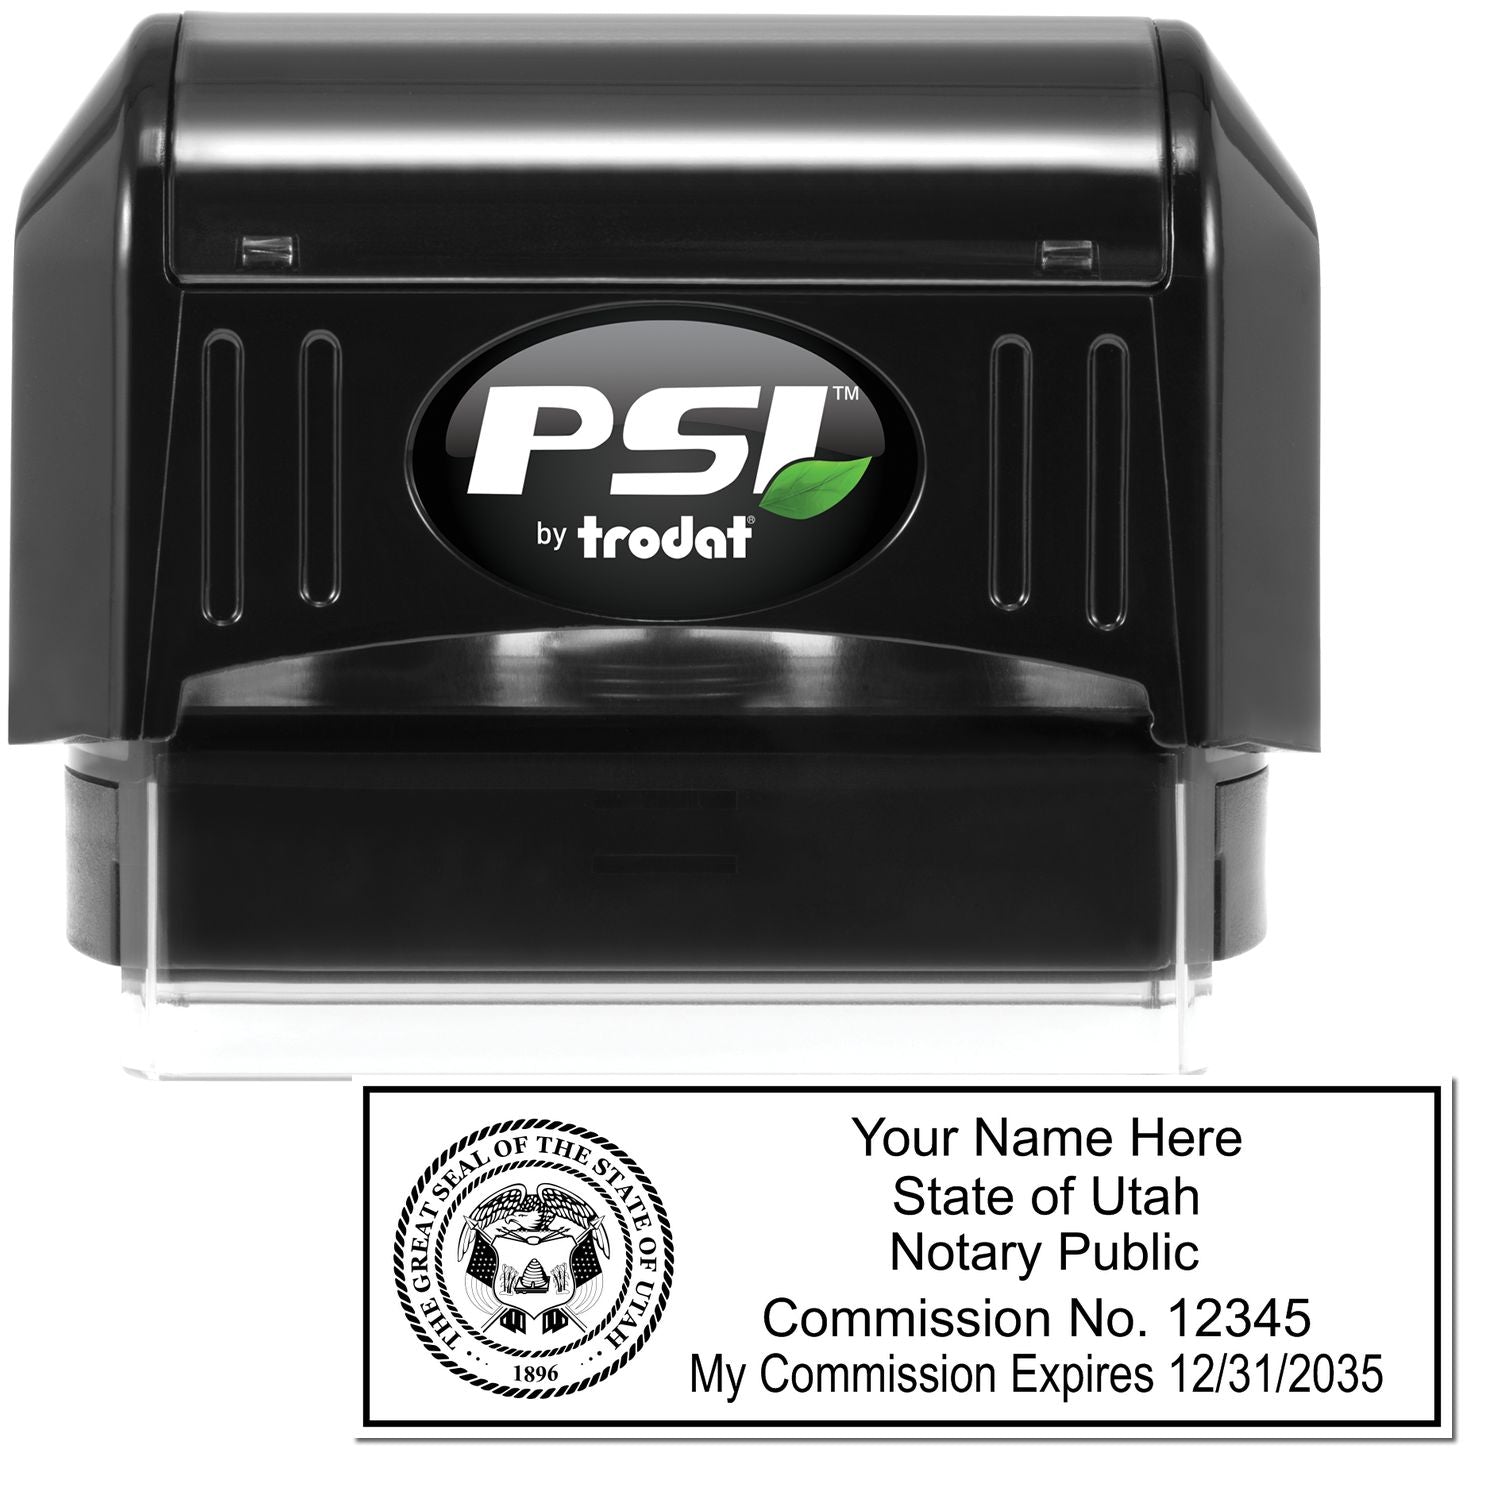 The main image for the PSI Utah Notary Stamp depicting a sample of the imprint and electronic files